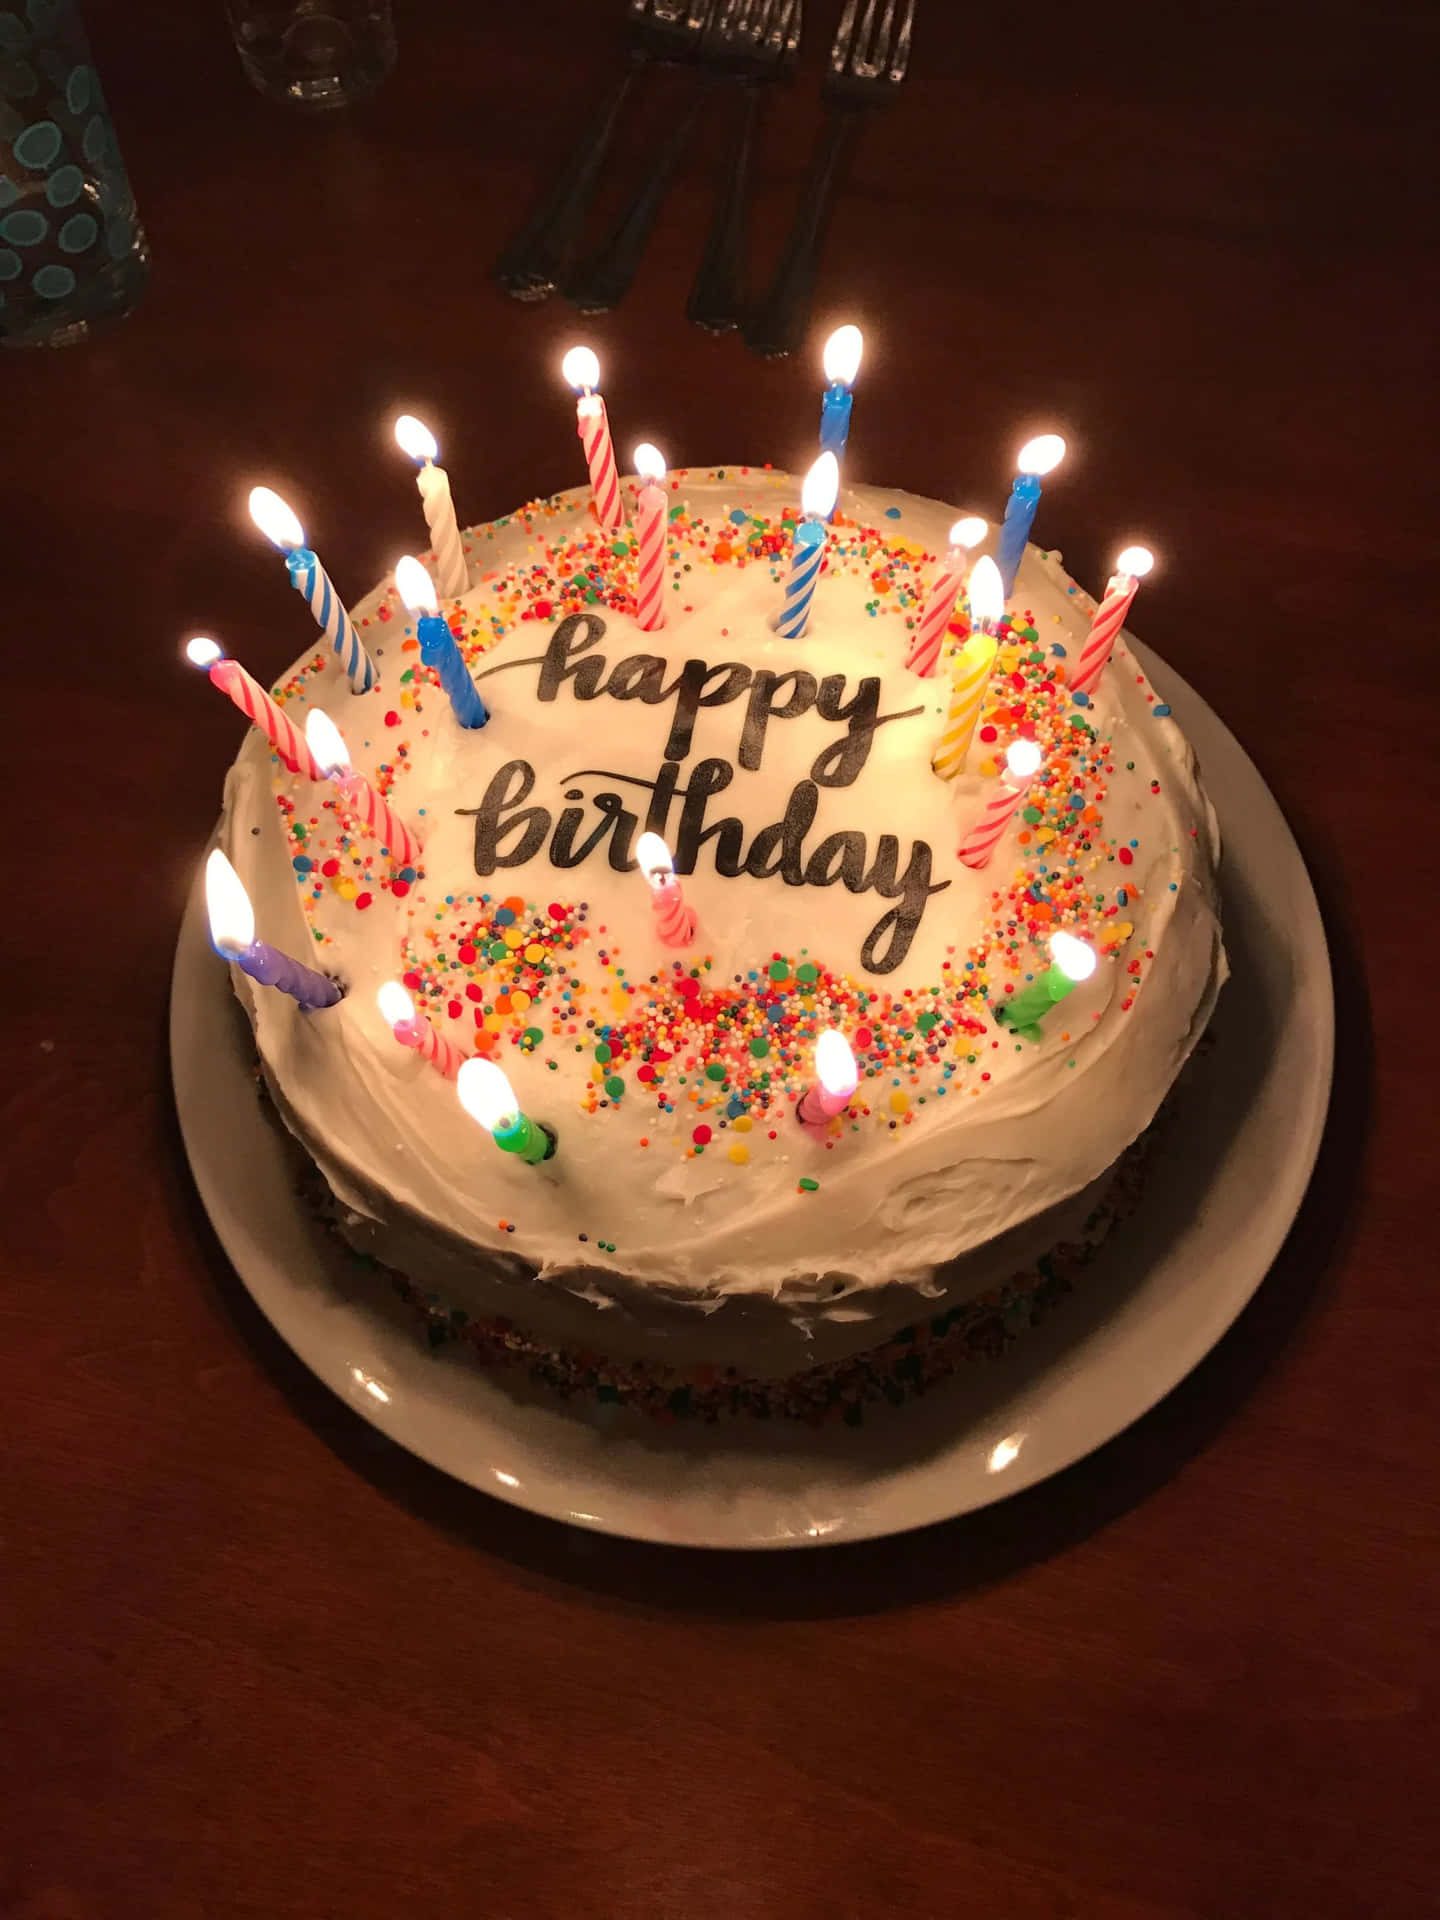 Delicious Happy Birthday Cake with Glowing Candles